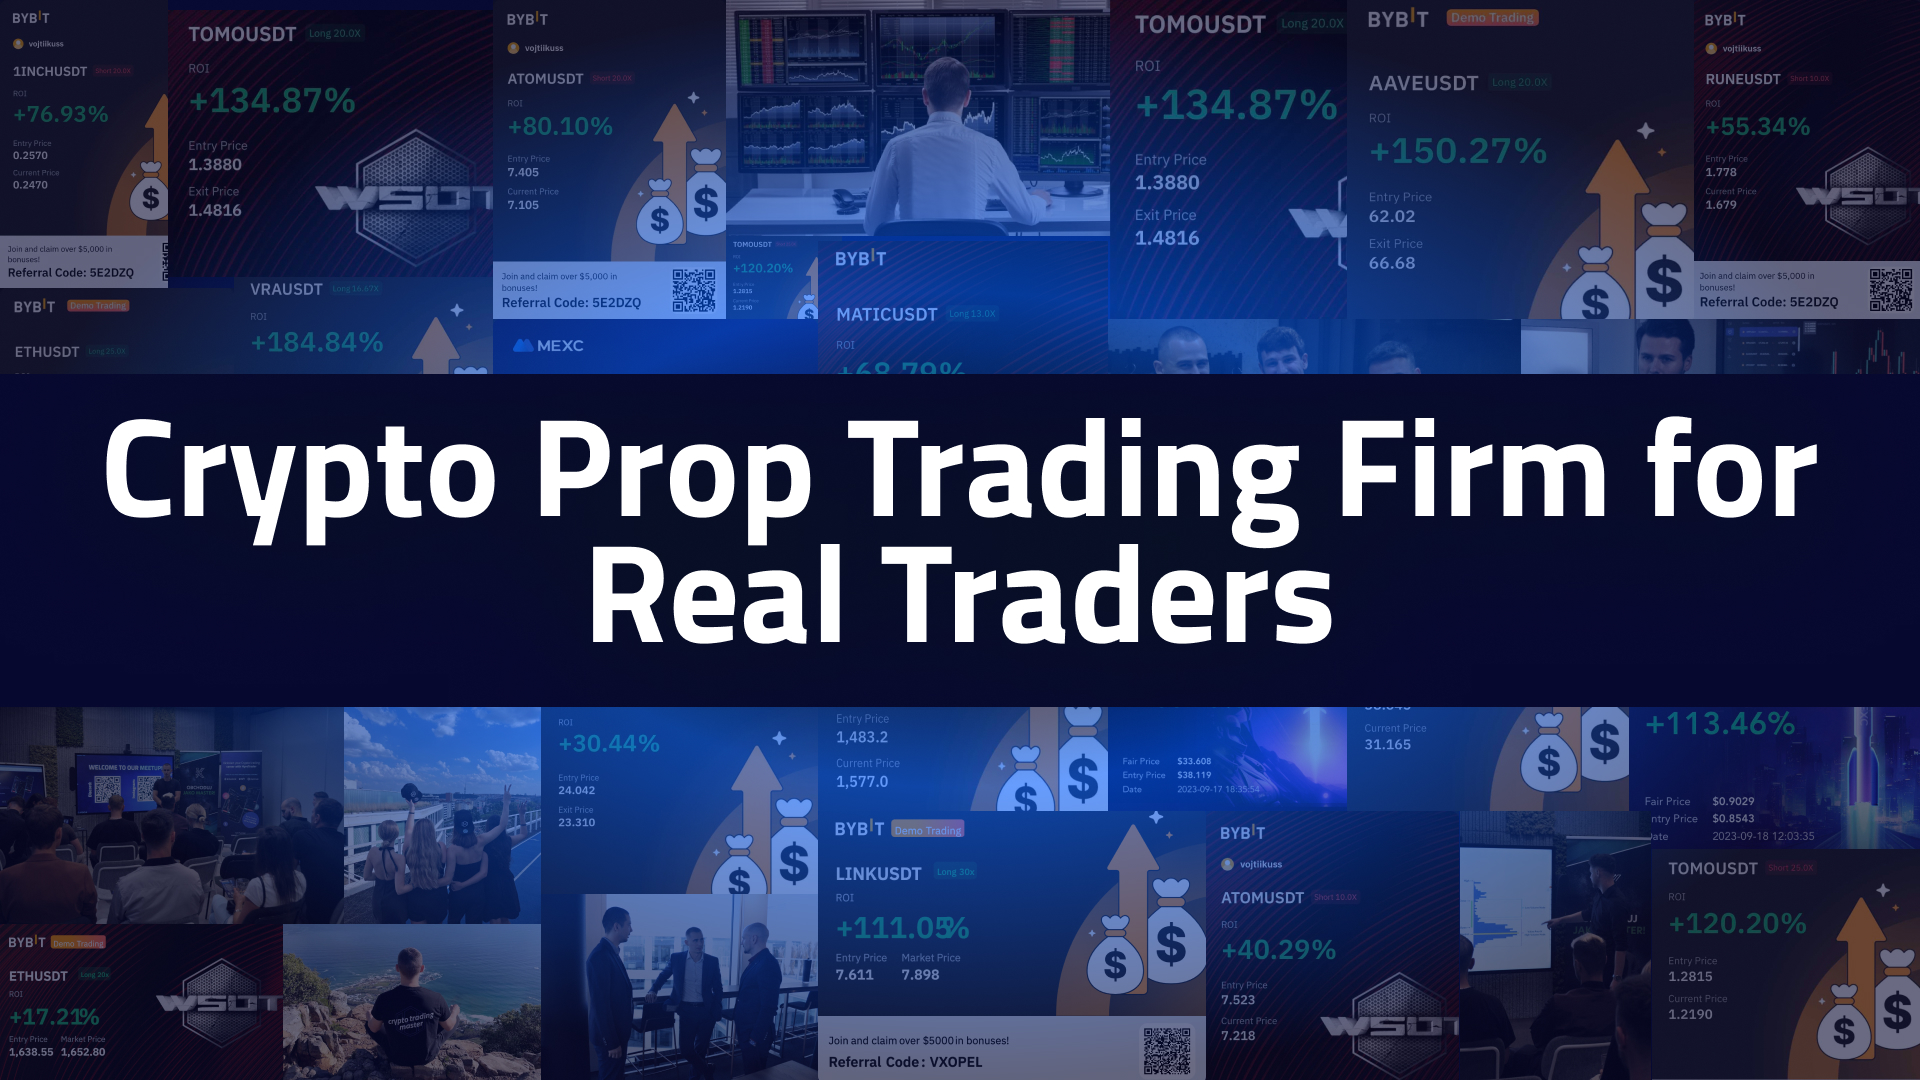 Crypto Prop Trading Firm for Real Traders